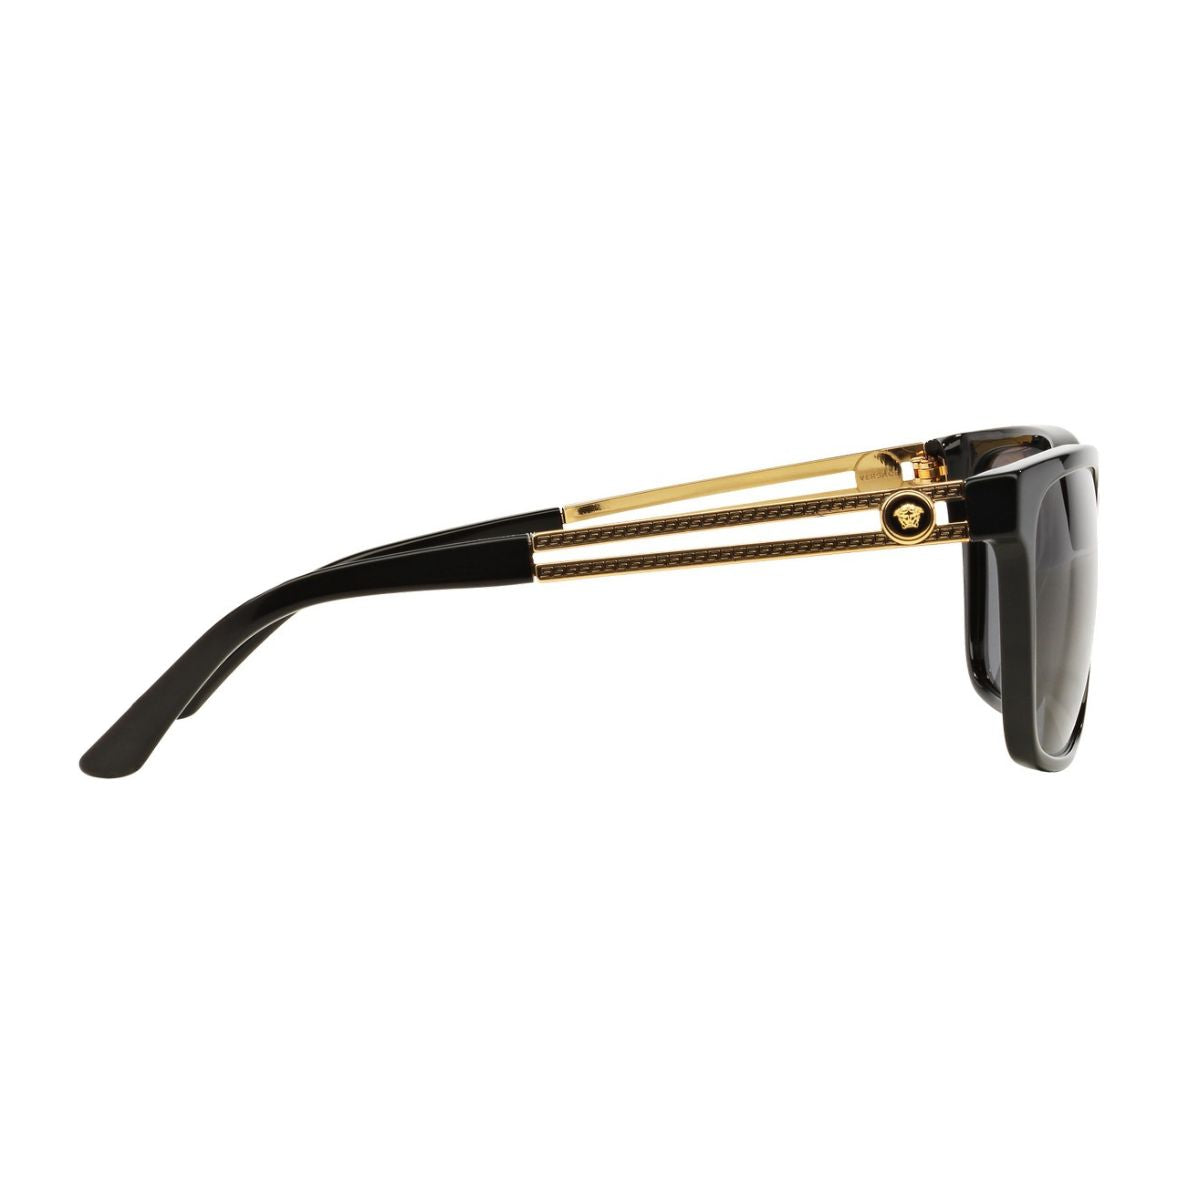 "Discover the latest Versace 4307 GB1/87 sunglasses in black and gold at Optorium. Perfect for men and women."